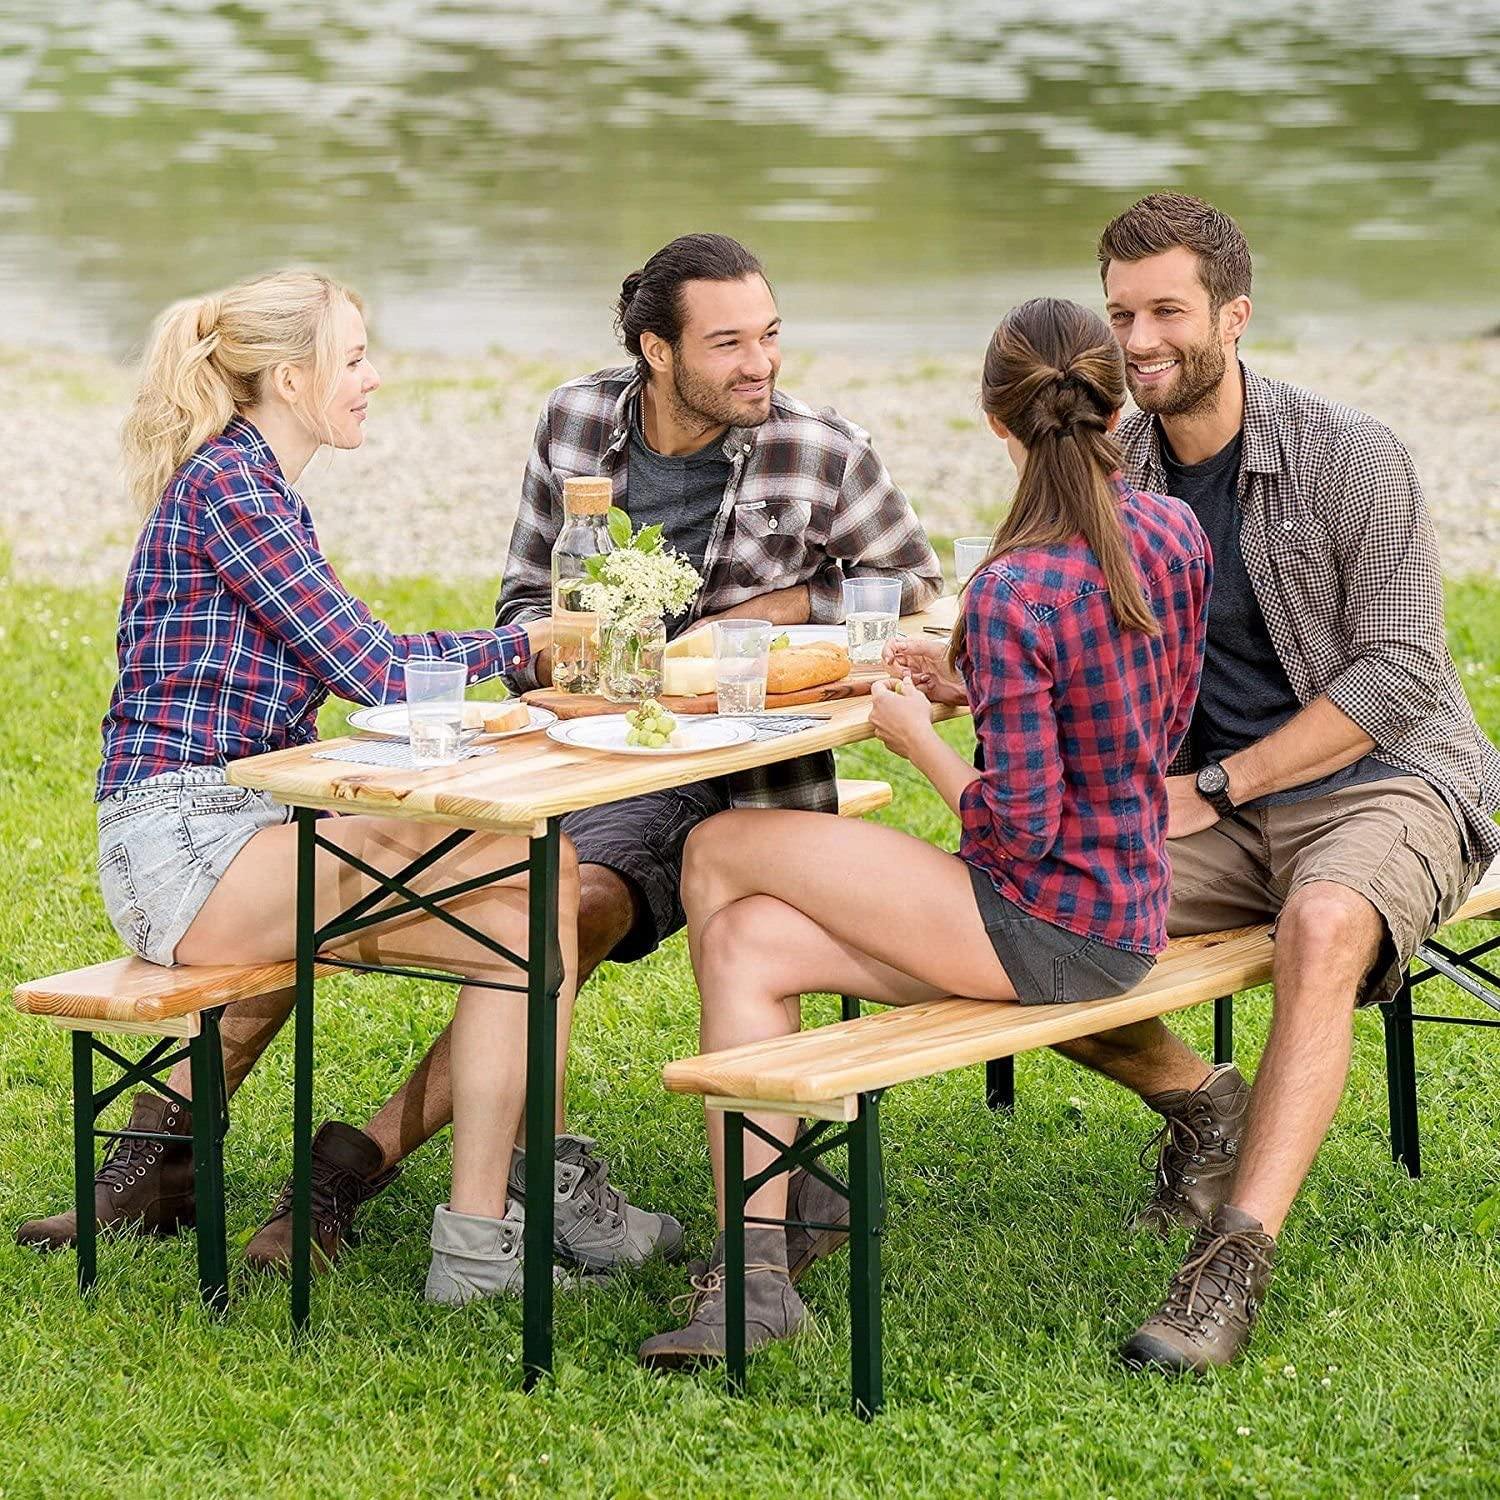 70" 3-Piece Portable Folding Picnic Beer Table